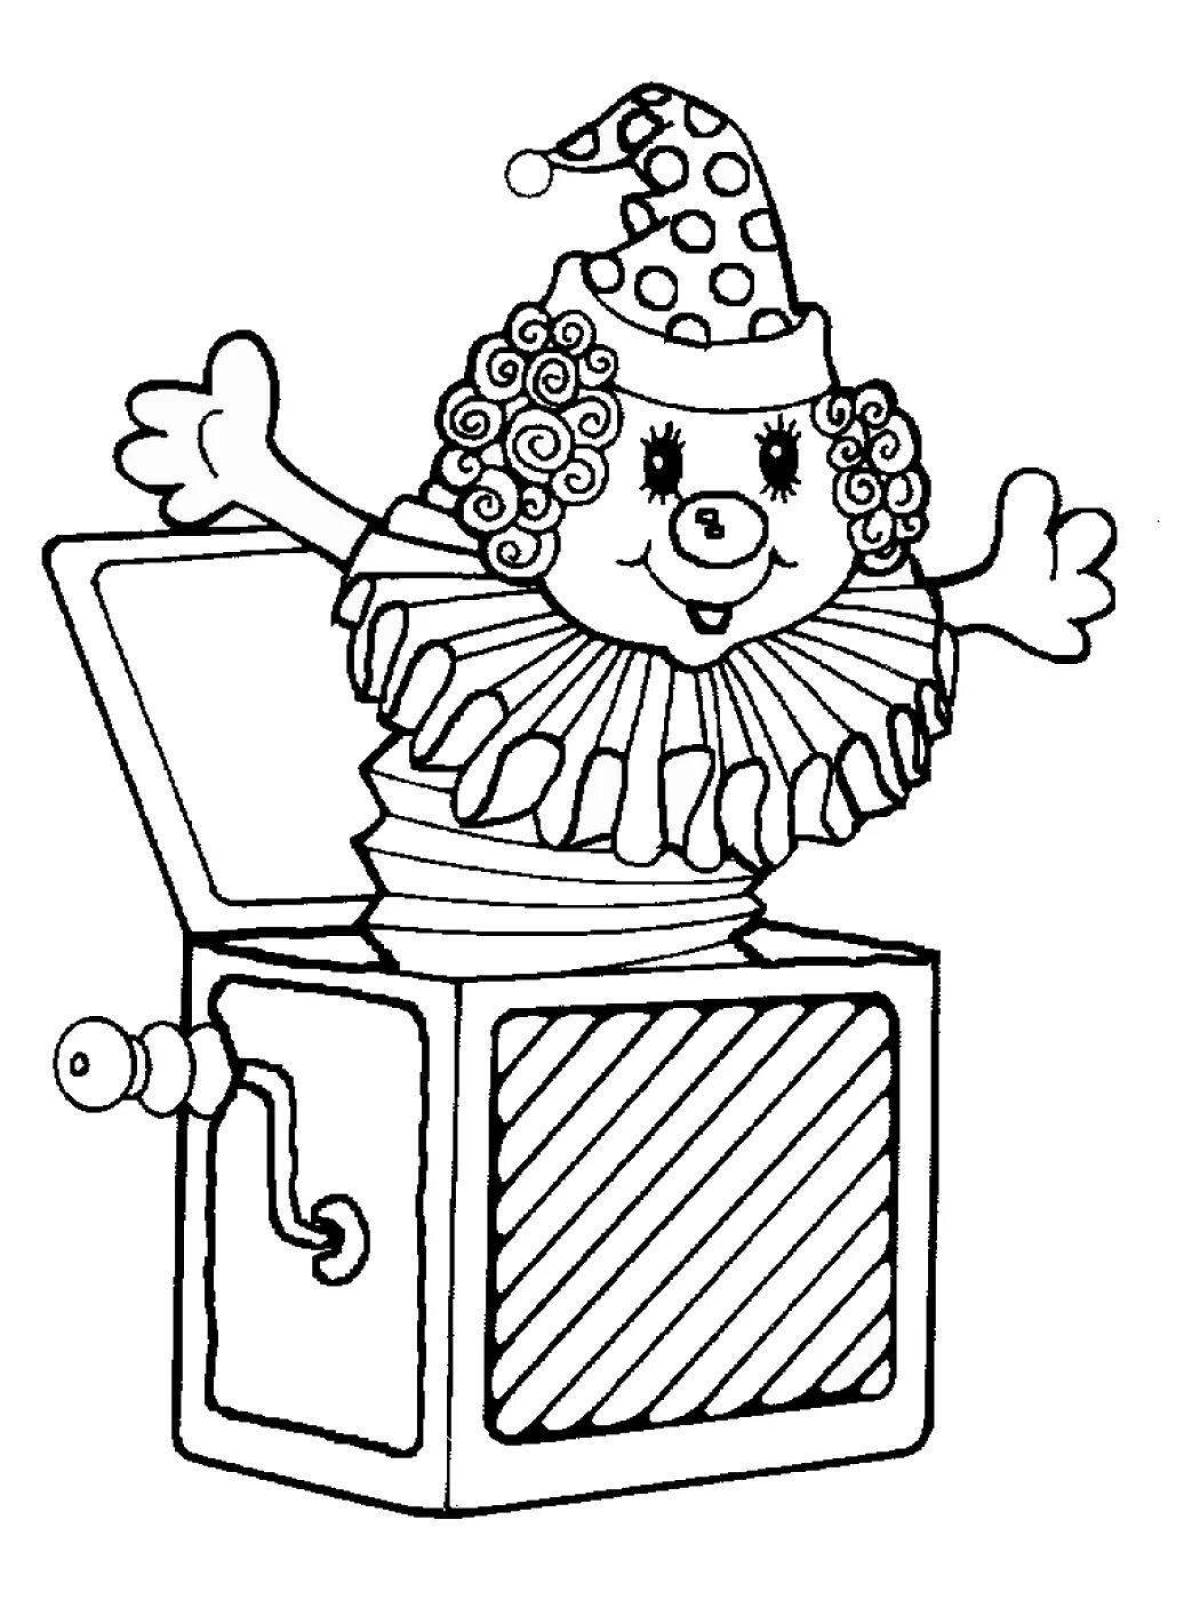 Gorgeous music box coloring page